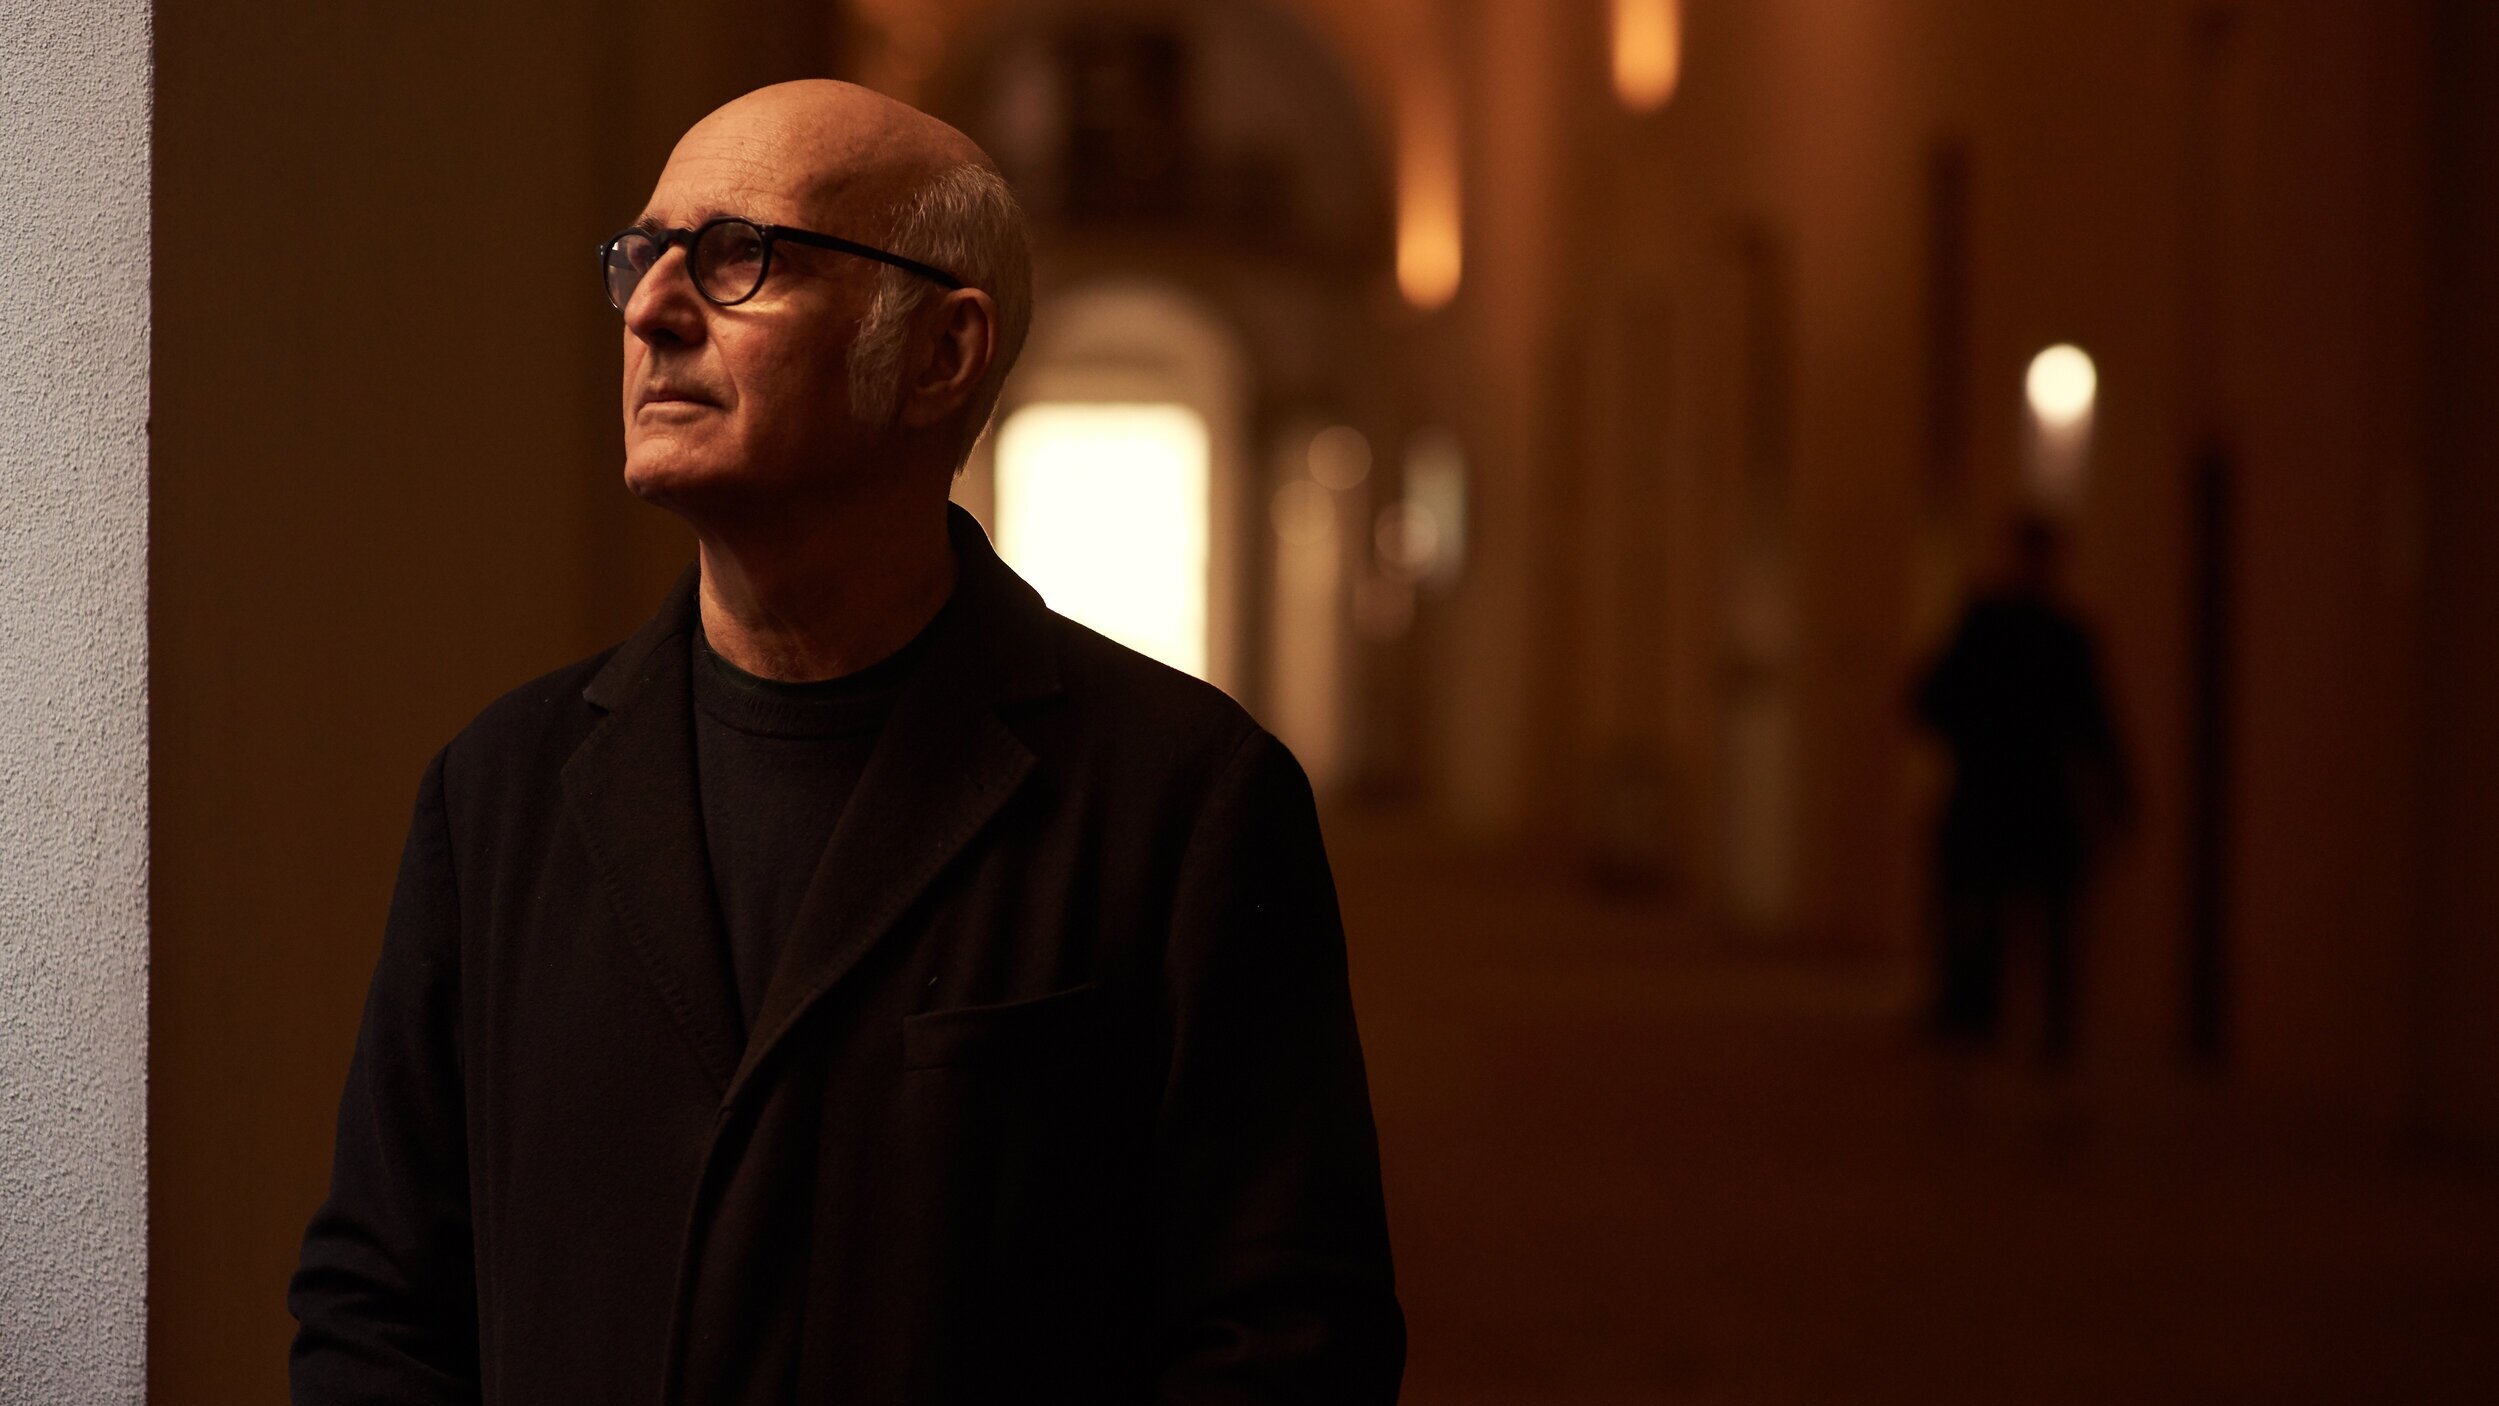 Ludovico Einaudi has released a new piano album, '12 Songs From